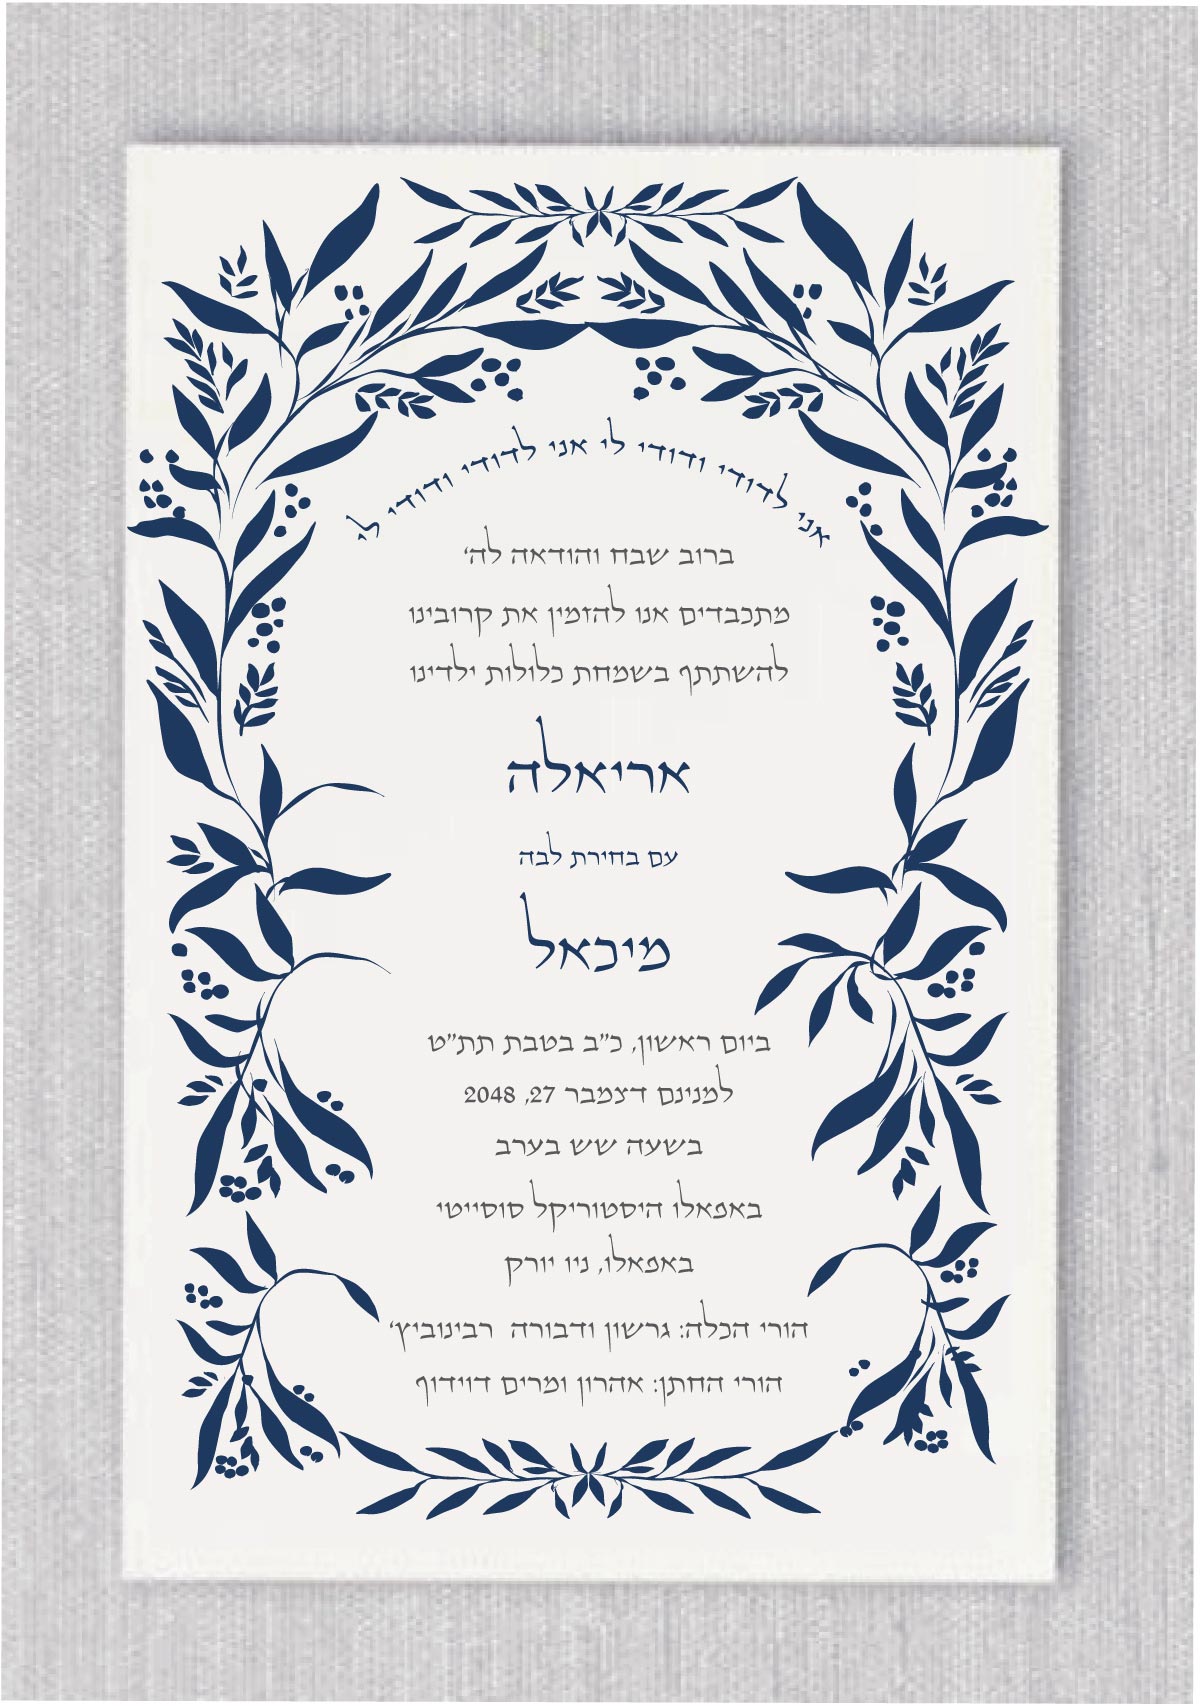 Gorgeous Floral - Hebrew Wedding Invitations is a wedding invitation that is both simple and elegant, featuring gorgeous floral details. We can include your names in a fancy, elegant font that is sure to impress your guests and showcase your sophisticated style. With our attention to detail, your guests will be thrilled to receive such a beautiful invitation. Let's collaborate and make your dream wedding invitation come to life!